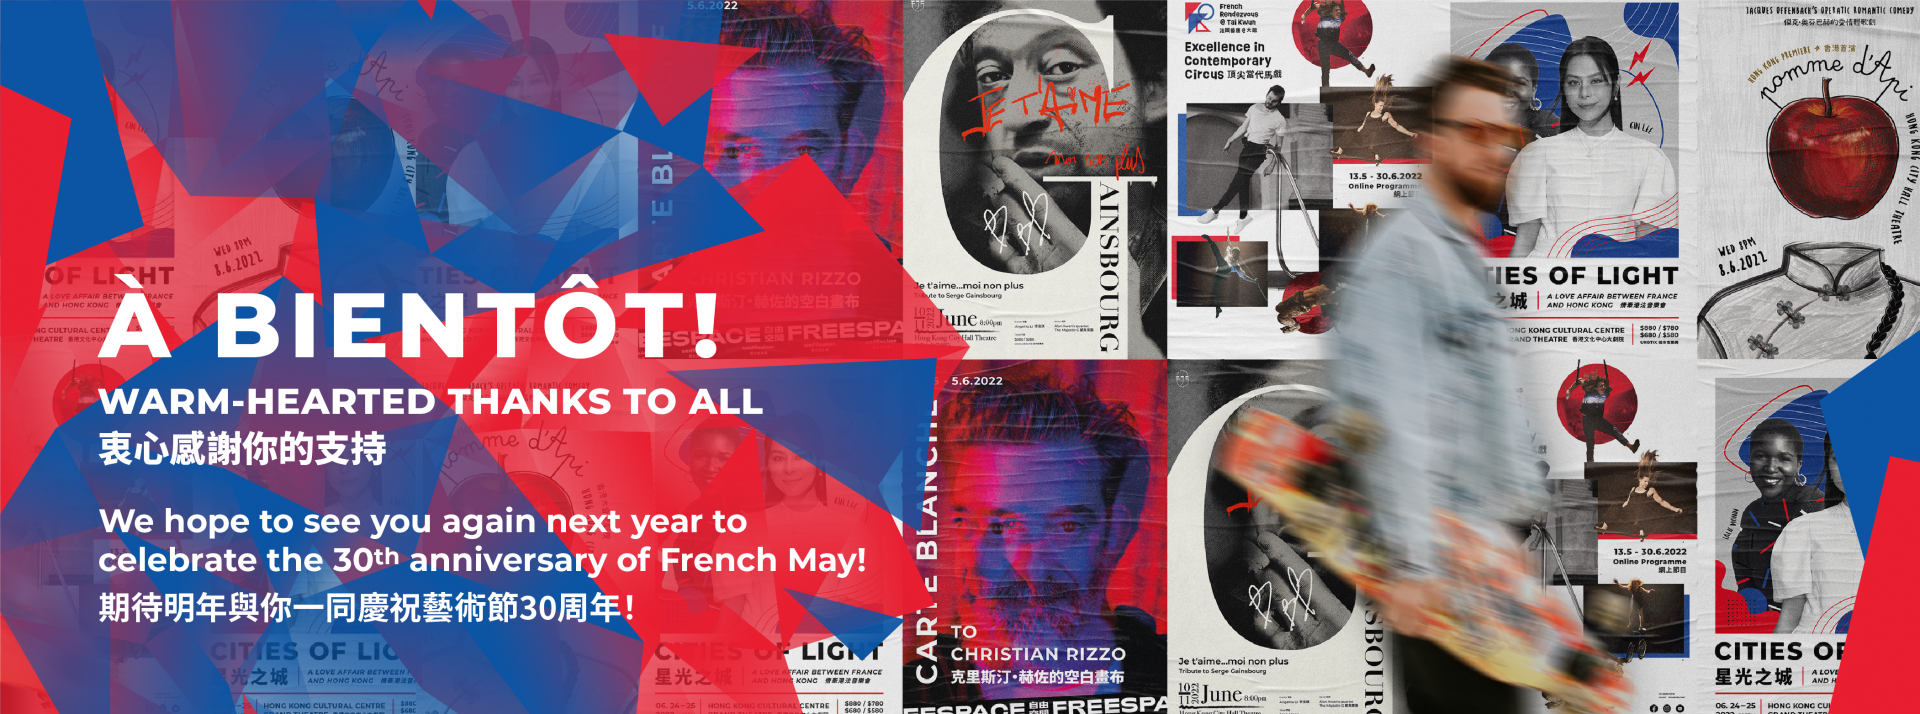 le french may french culture arts festival hk discount